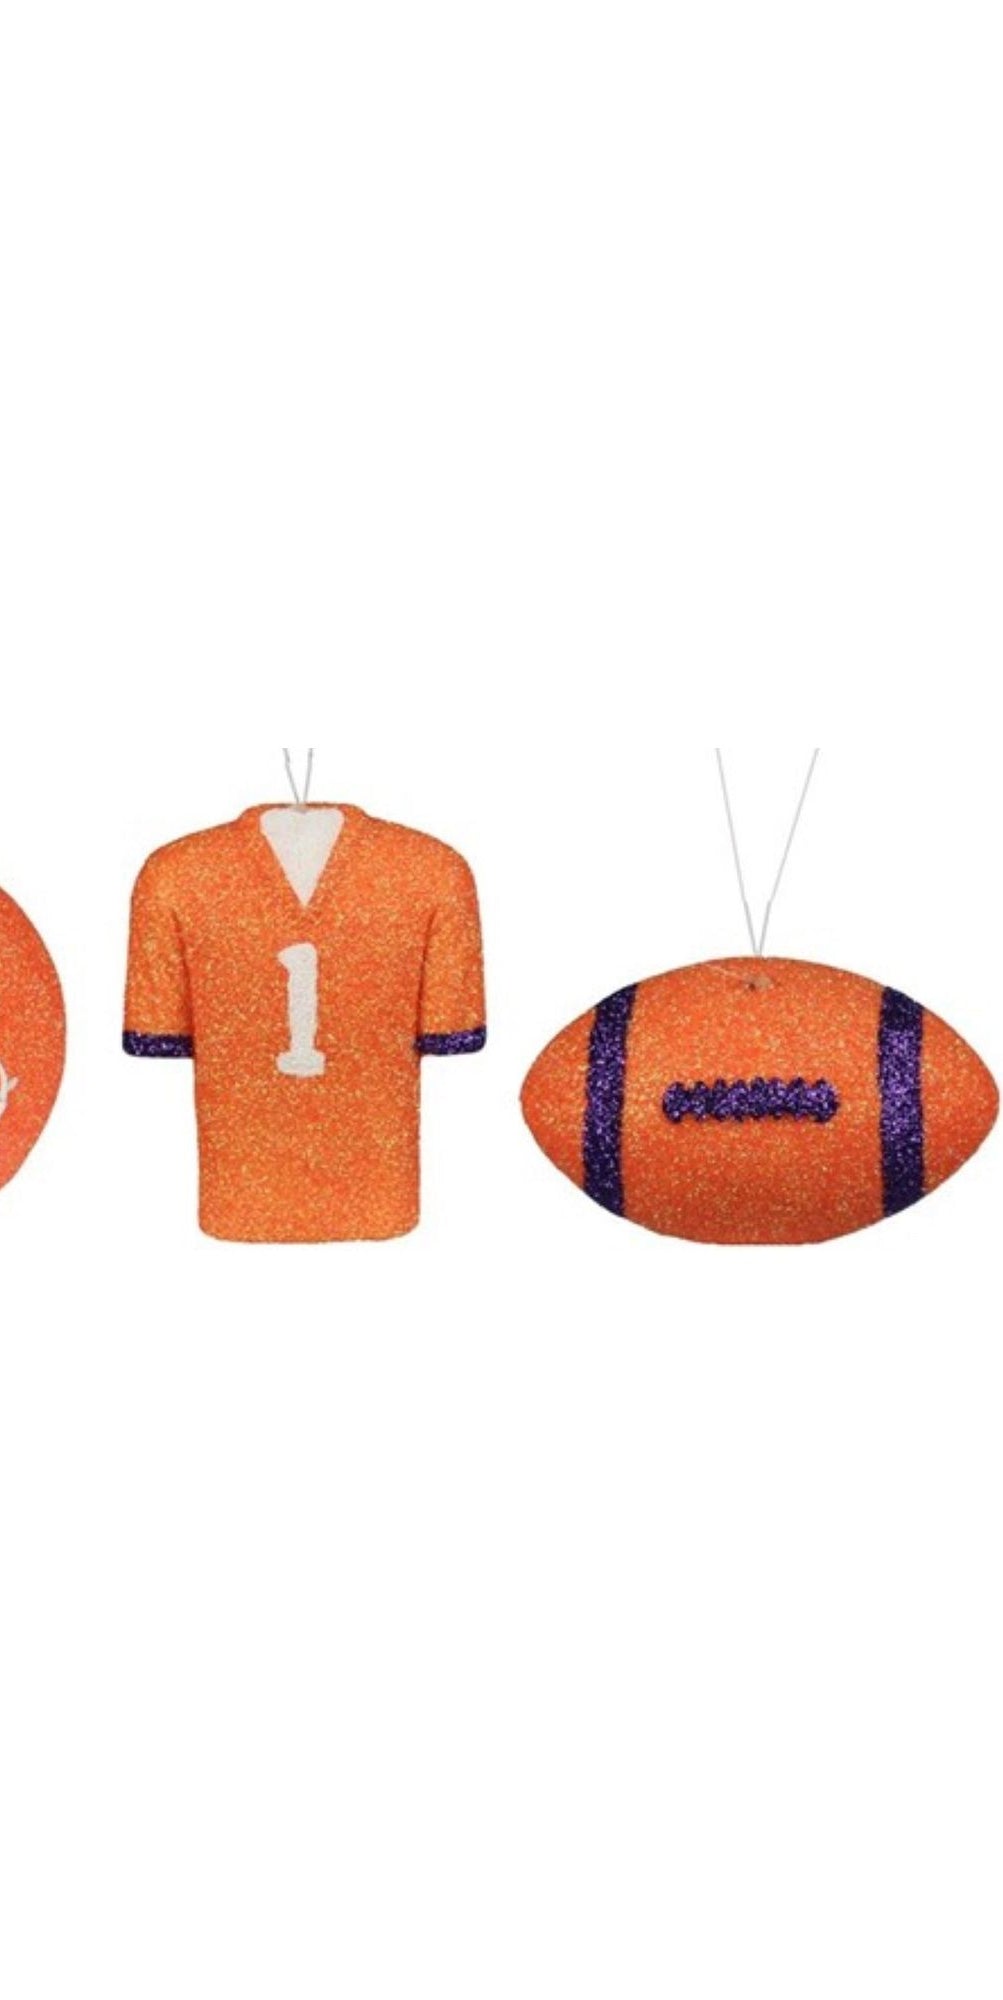 Glitter Football Ornament Assortment: Orange & Purple (Set of 3) - Michelle's aDOORable Creations - Holiday Ornaments